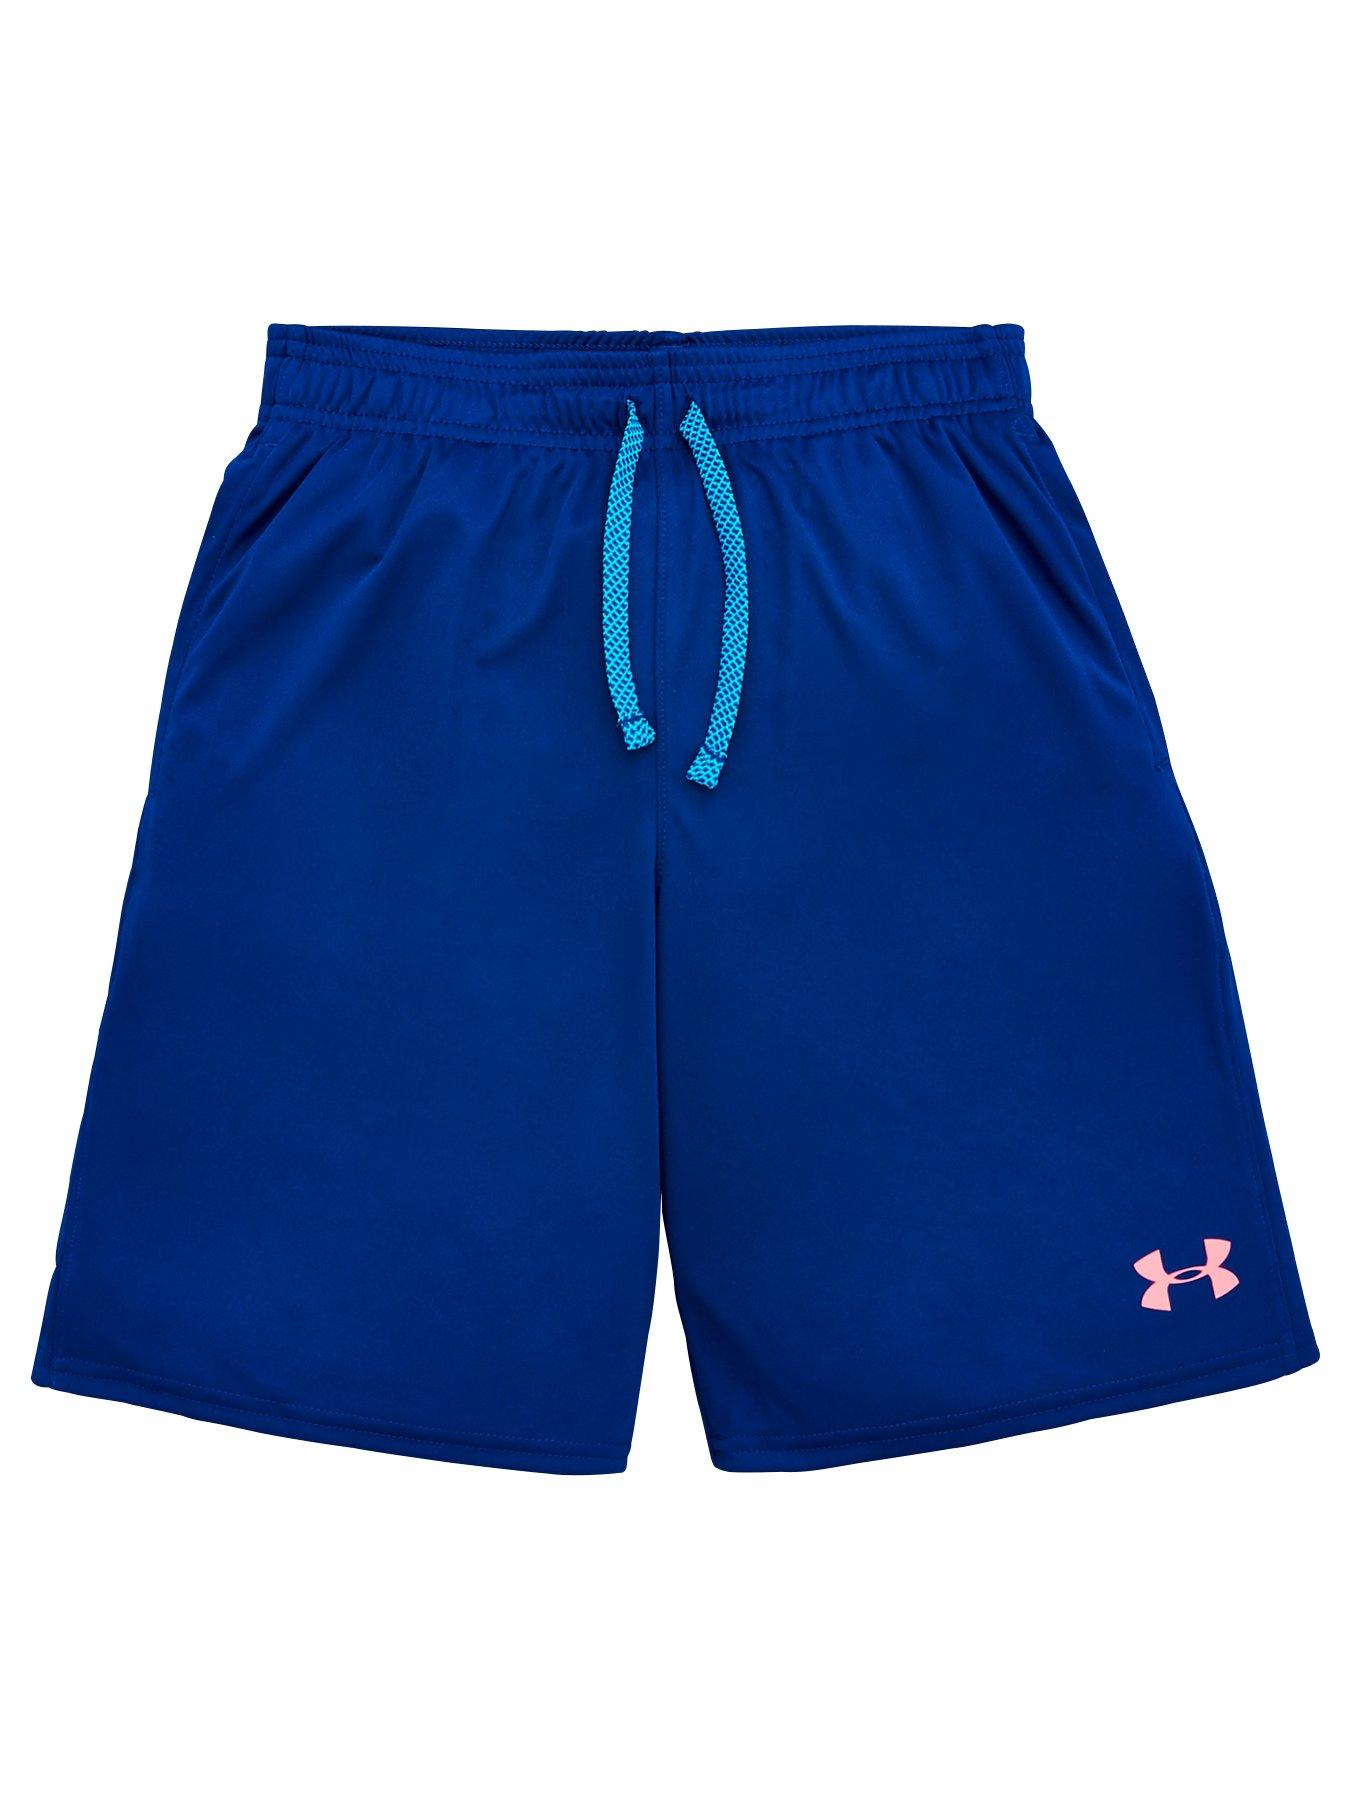 Details about   Baby Girl's Infant Under Armour Heatgear Polyester Shorts